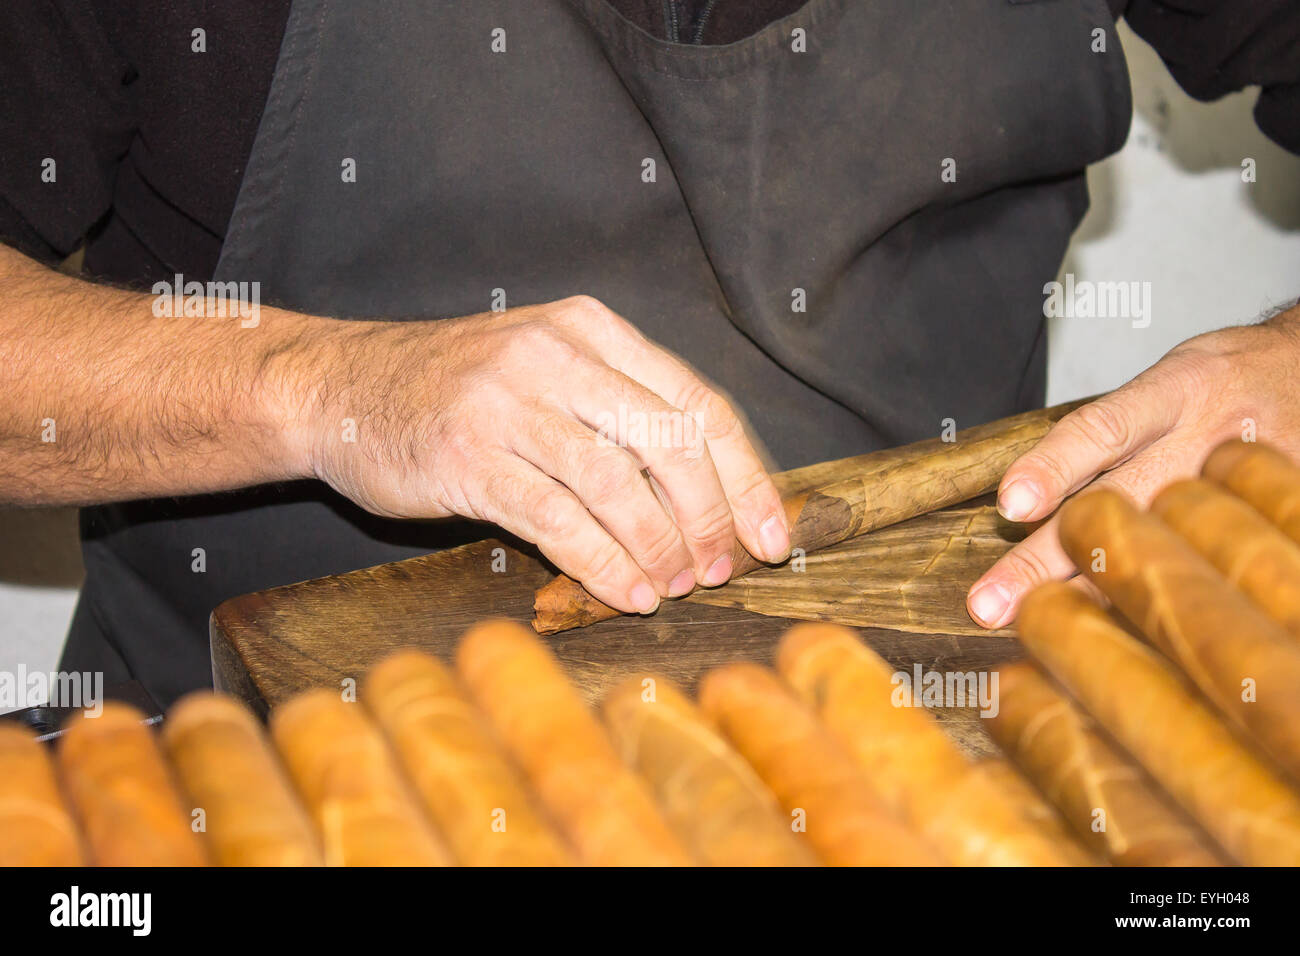 A local Spanish man demonstratesa group of tourists how to roll and wrap hand made cigars. Stock Photo